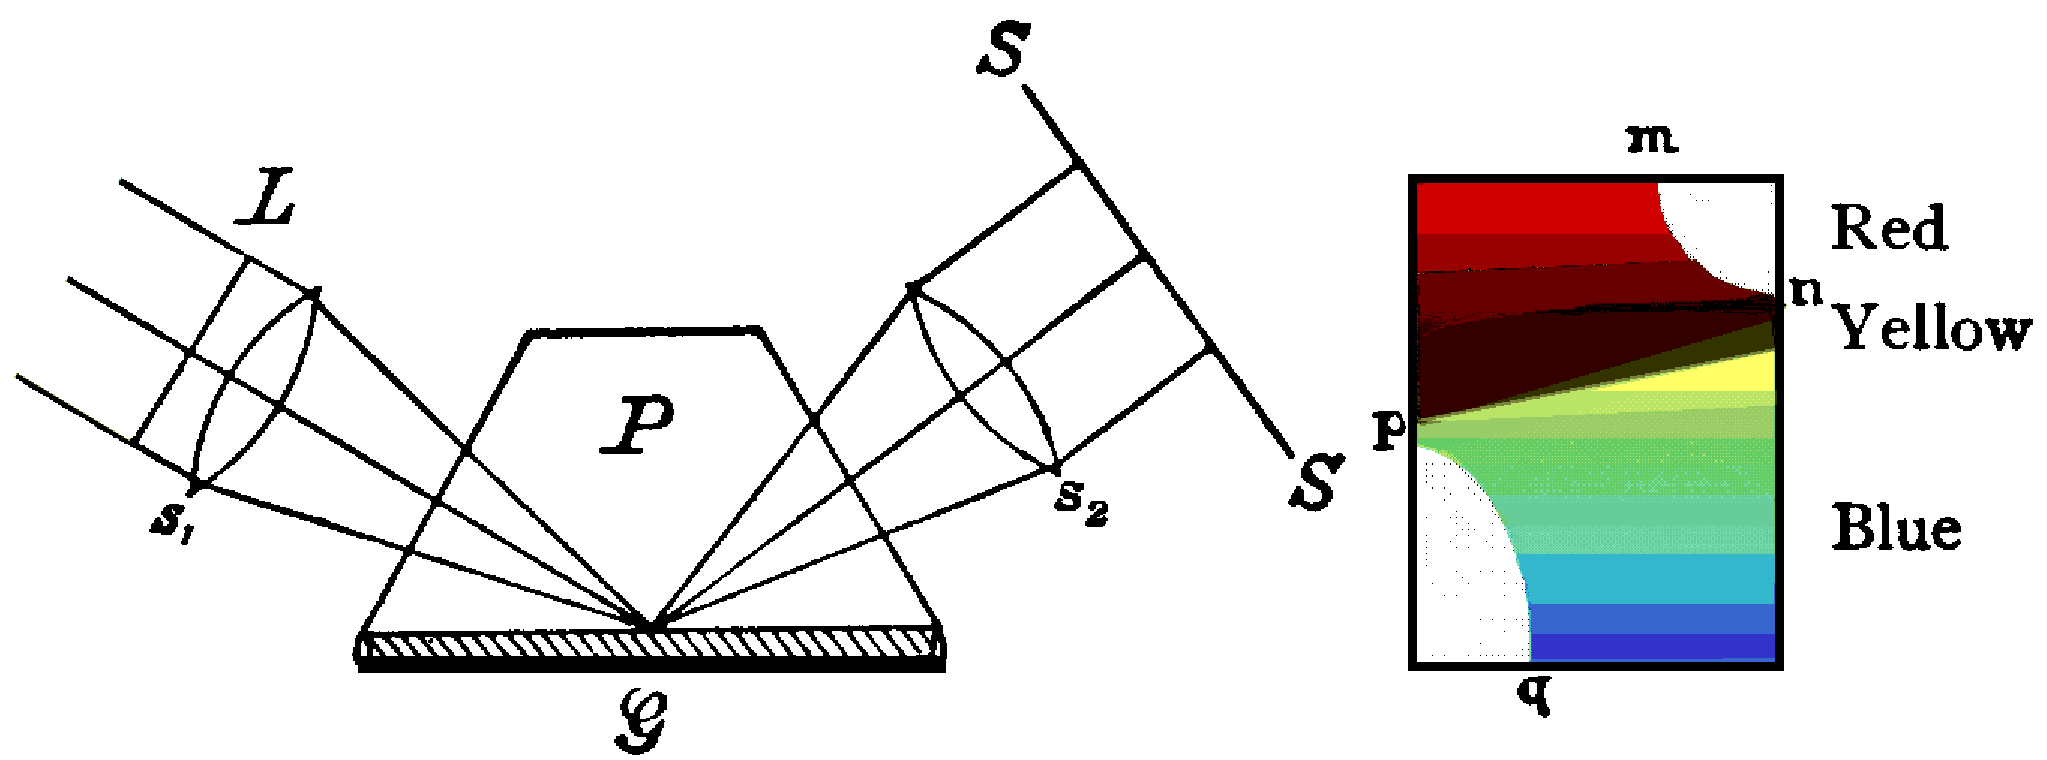 Drude 1902, p. 395:  The Mach-Arbes method of measuring anomalous 
dispersion.